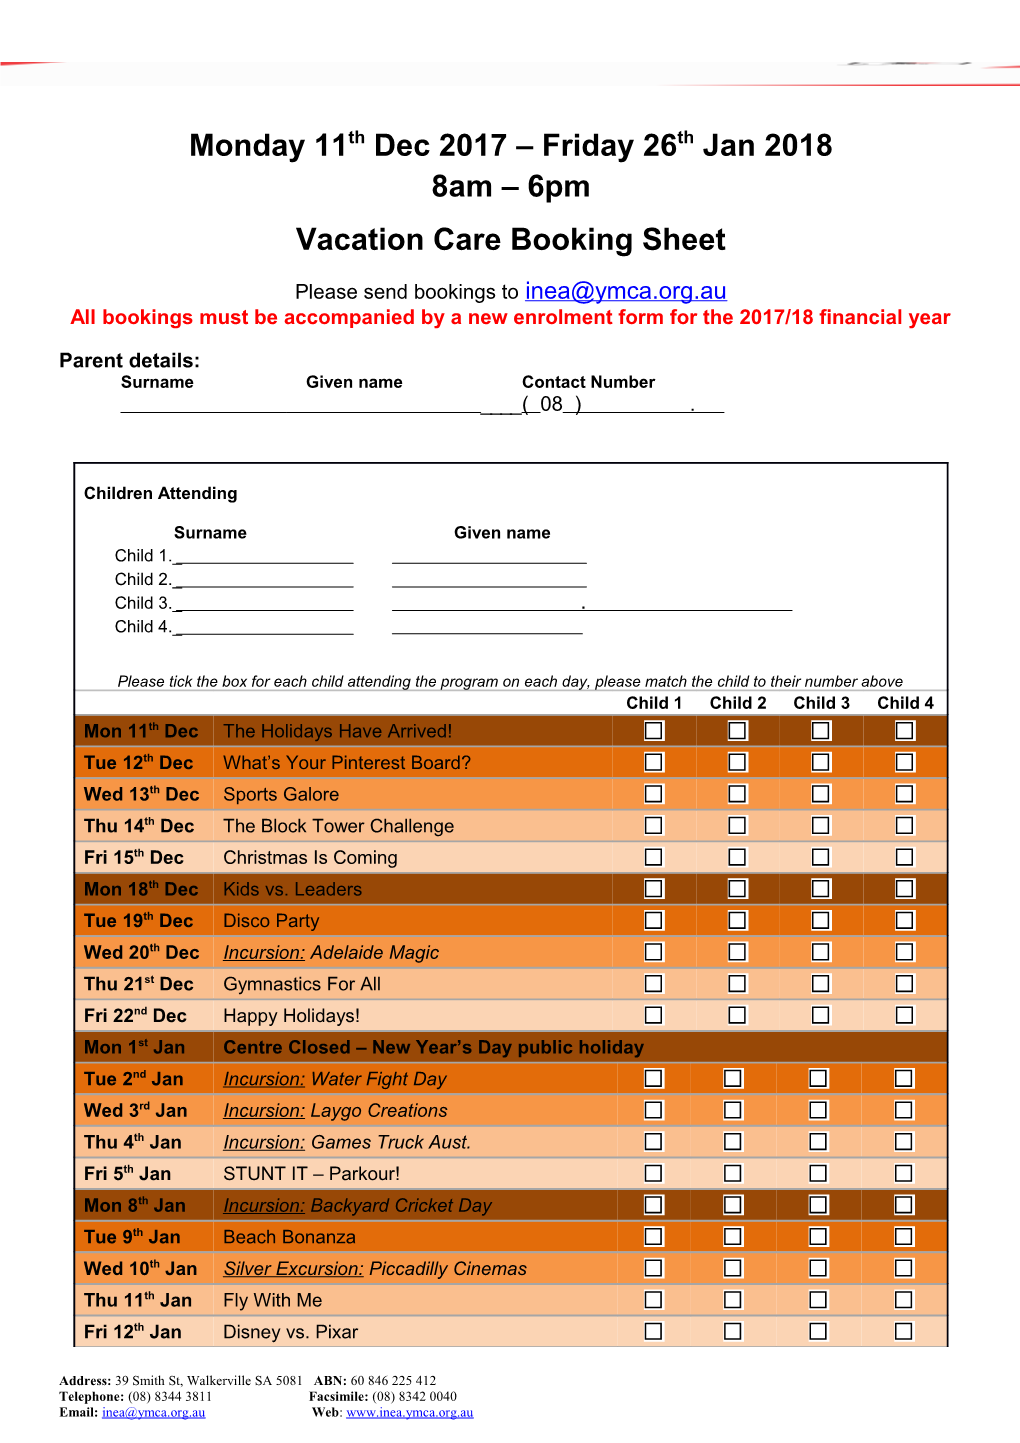 Walkerville YMCA Vacation Care Booking Sheet